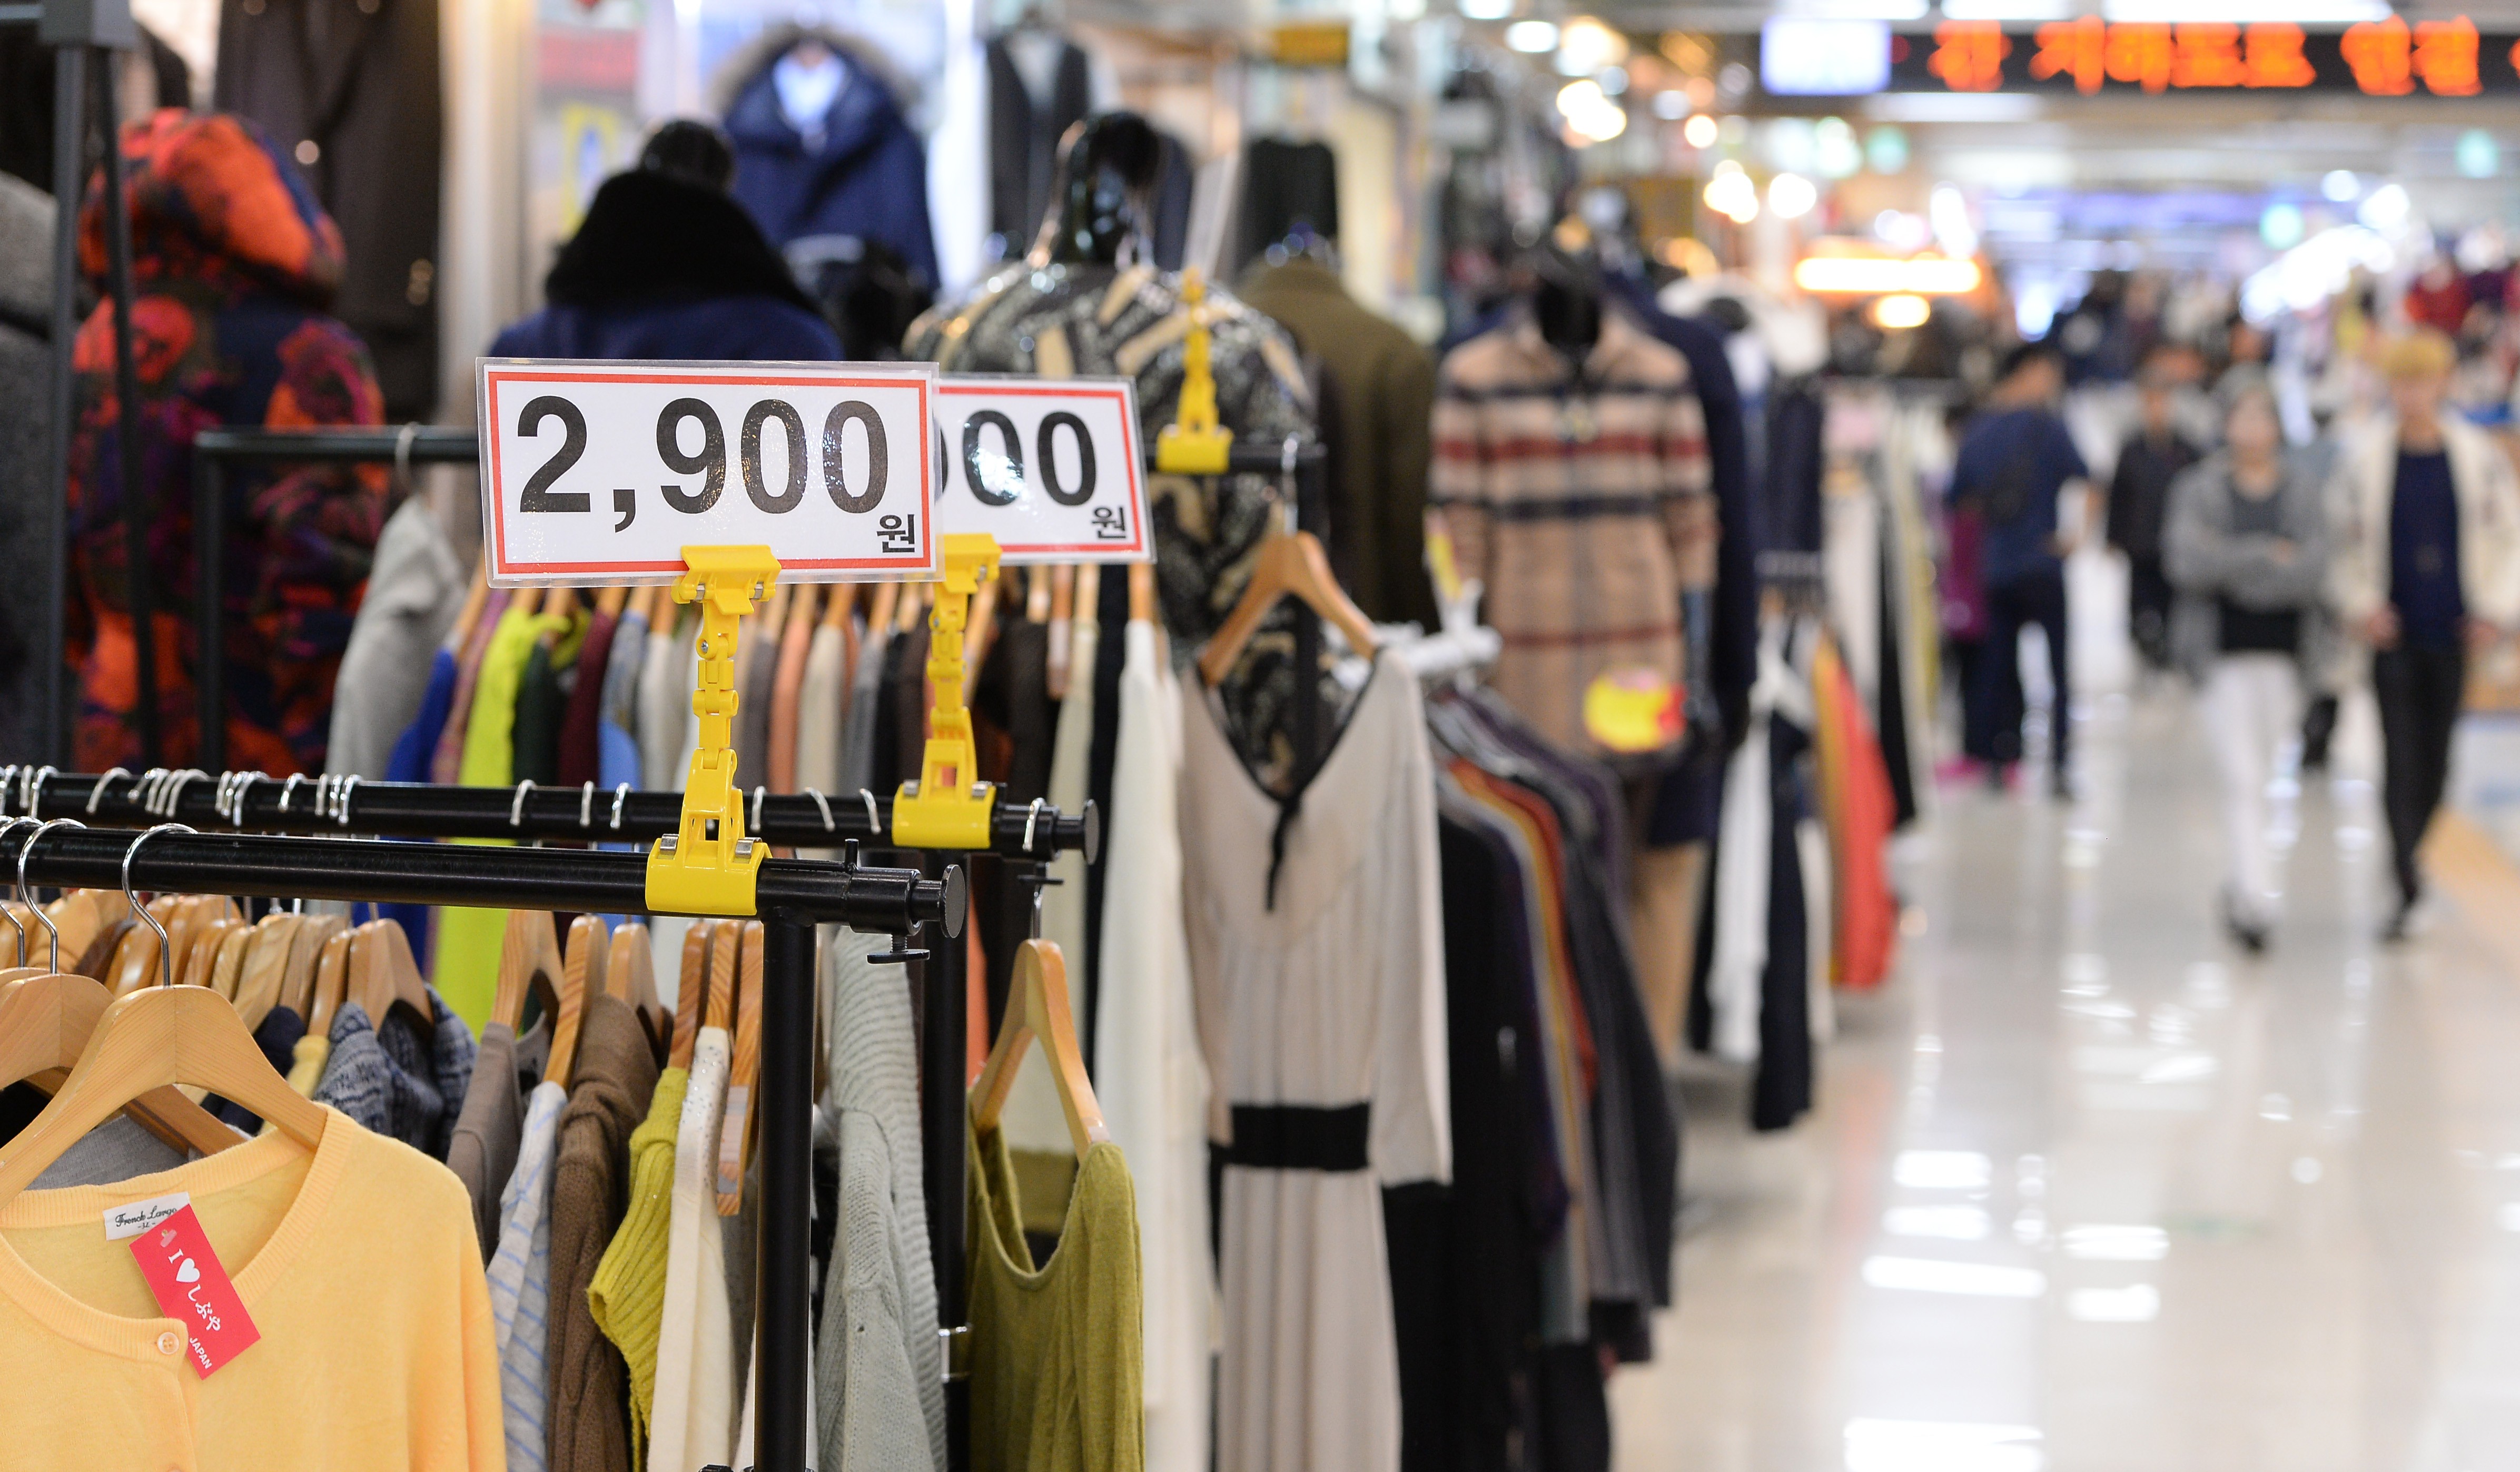 [July] Korea is a bustling shopping mecca below ground Photo